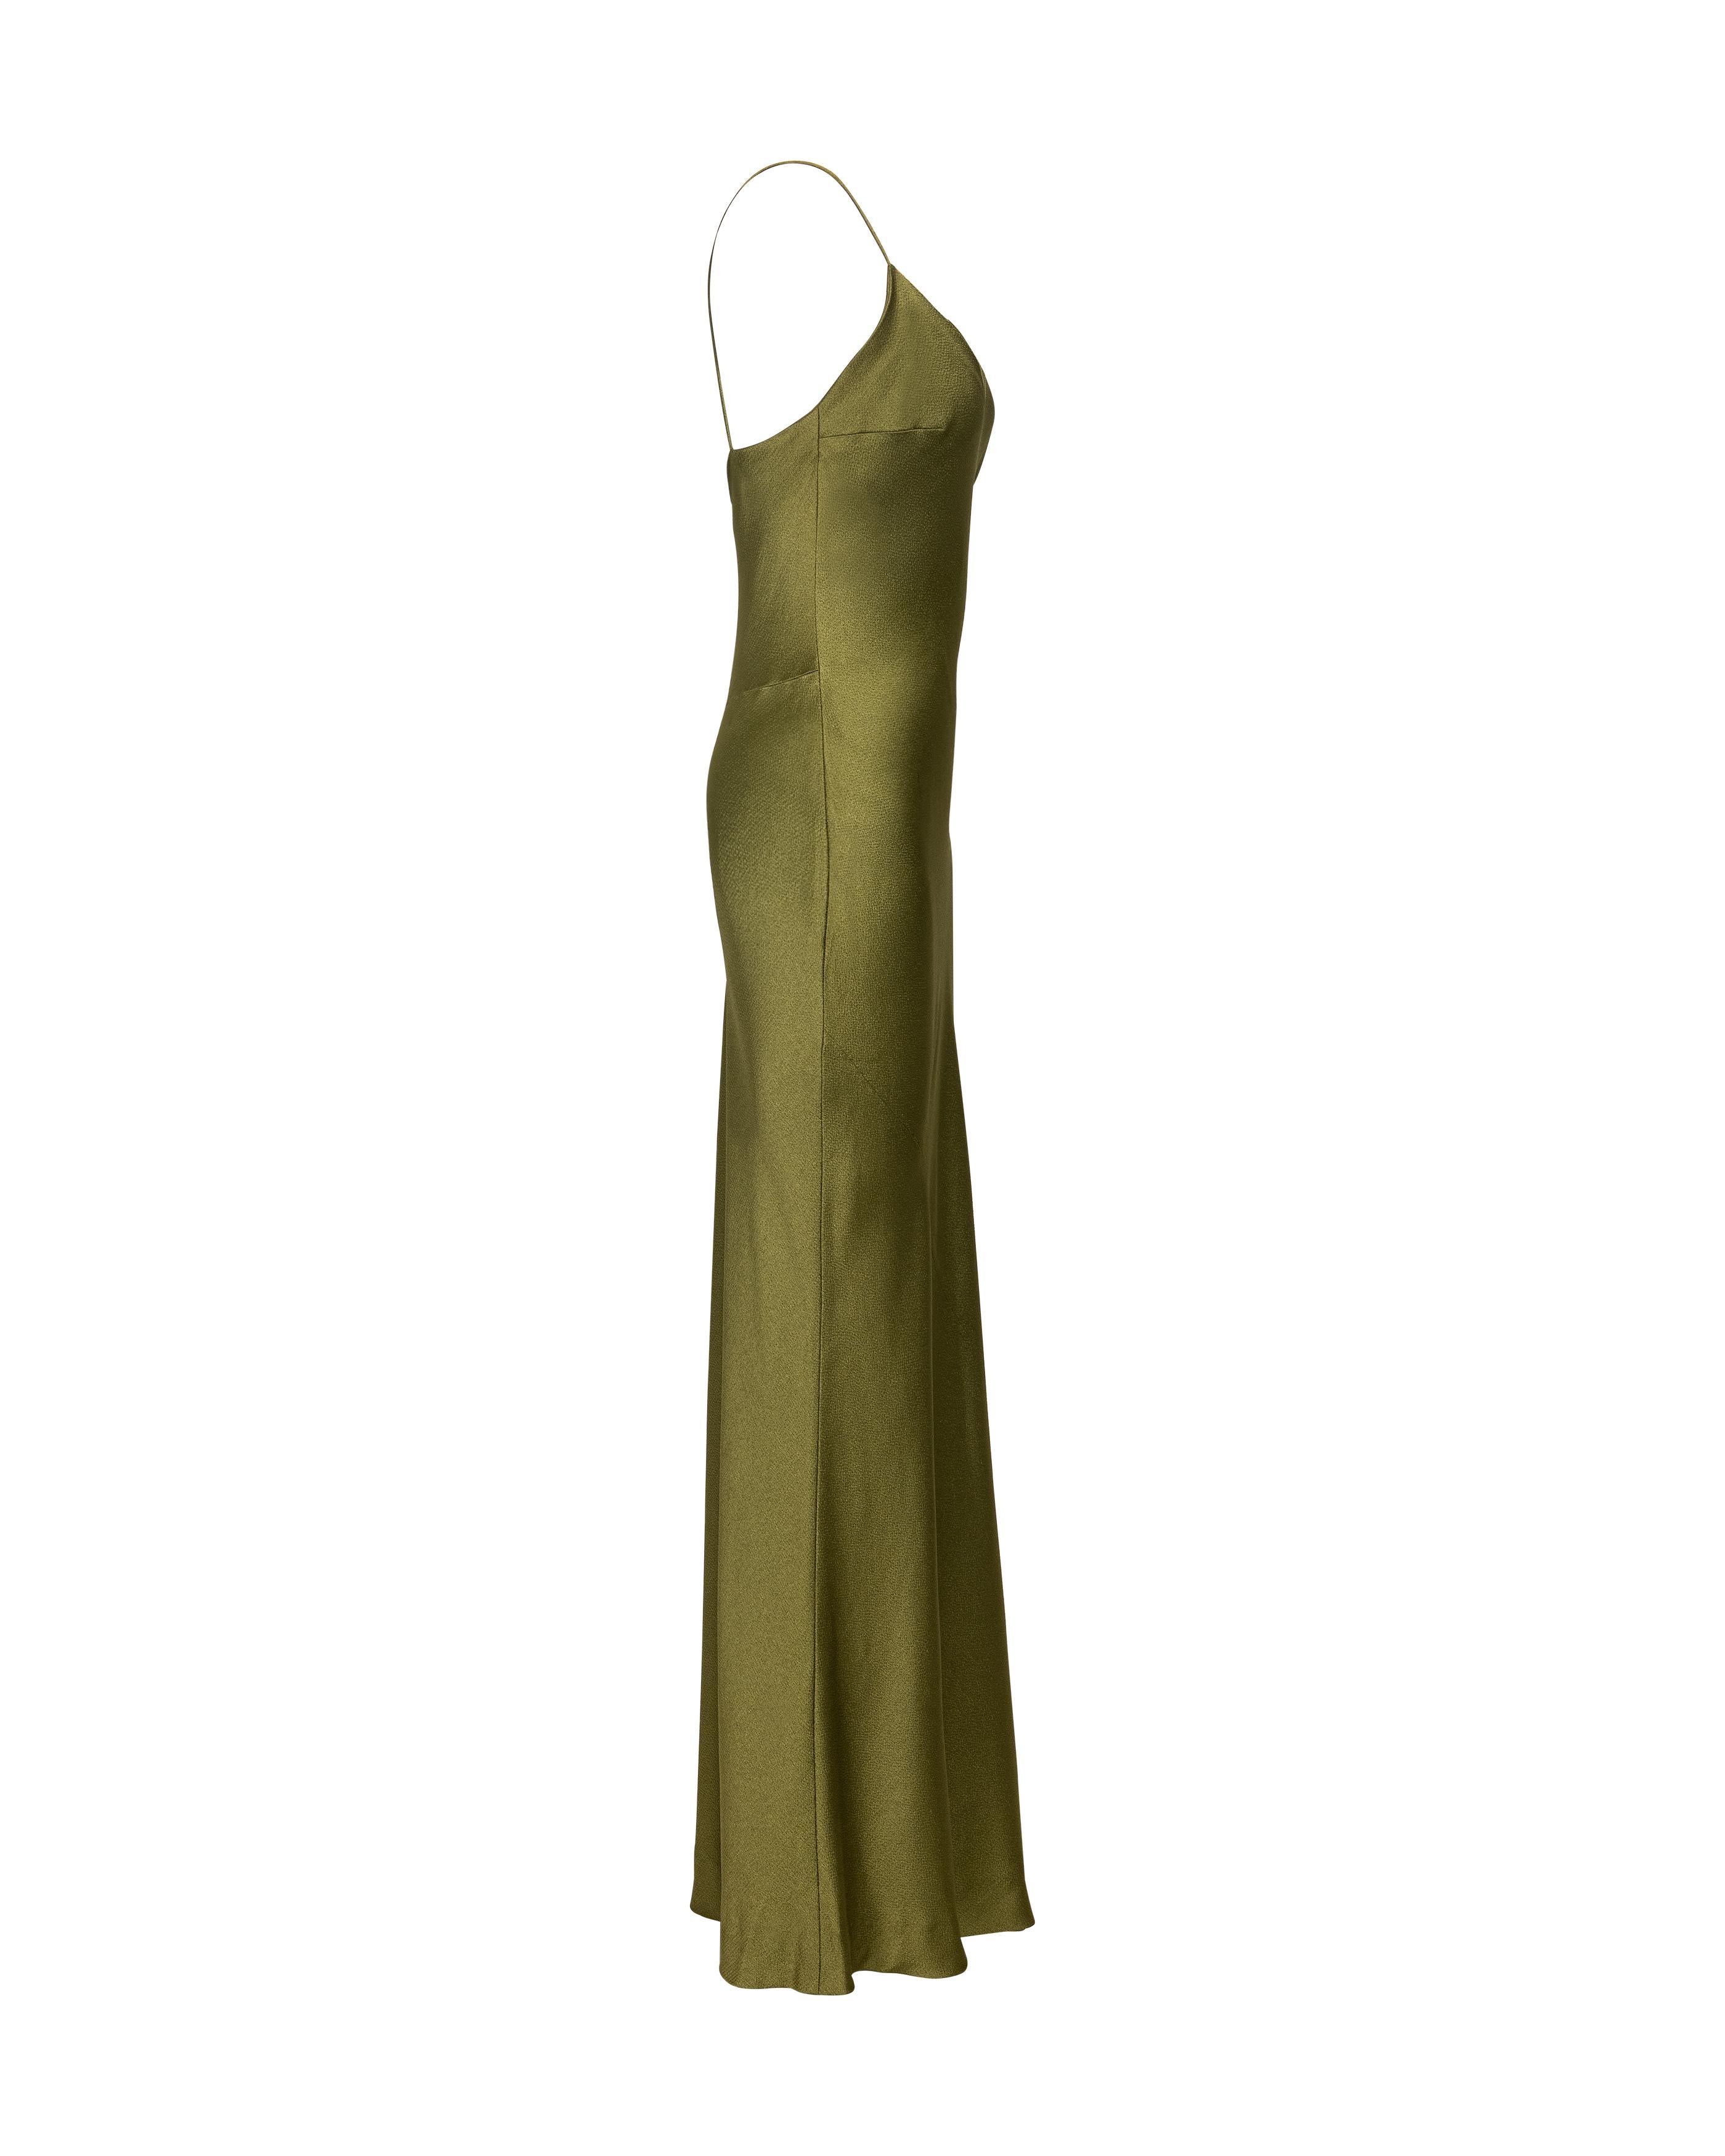 S/S 1999 Christian Dior by John Galliano Olive Green Bias Cut Slip Gown For Sale 1